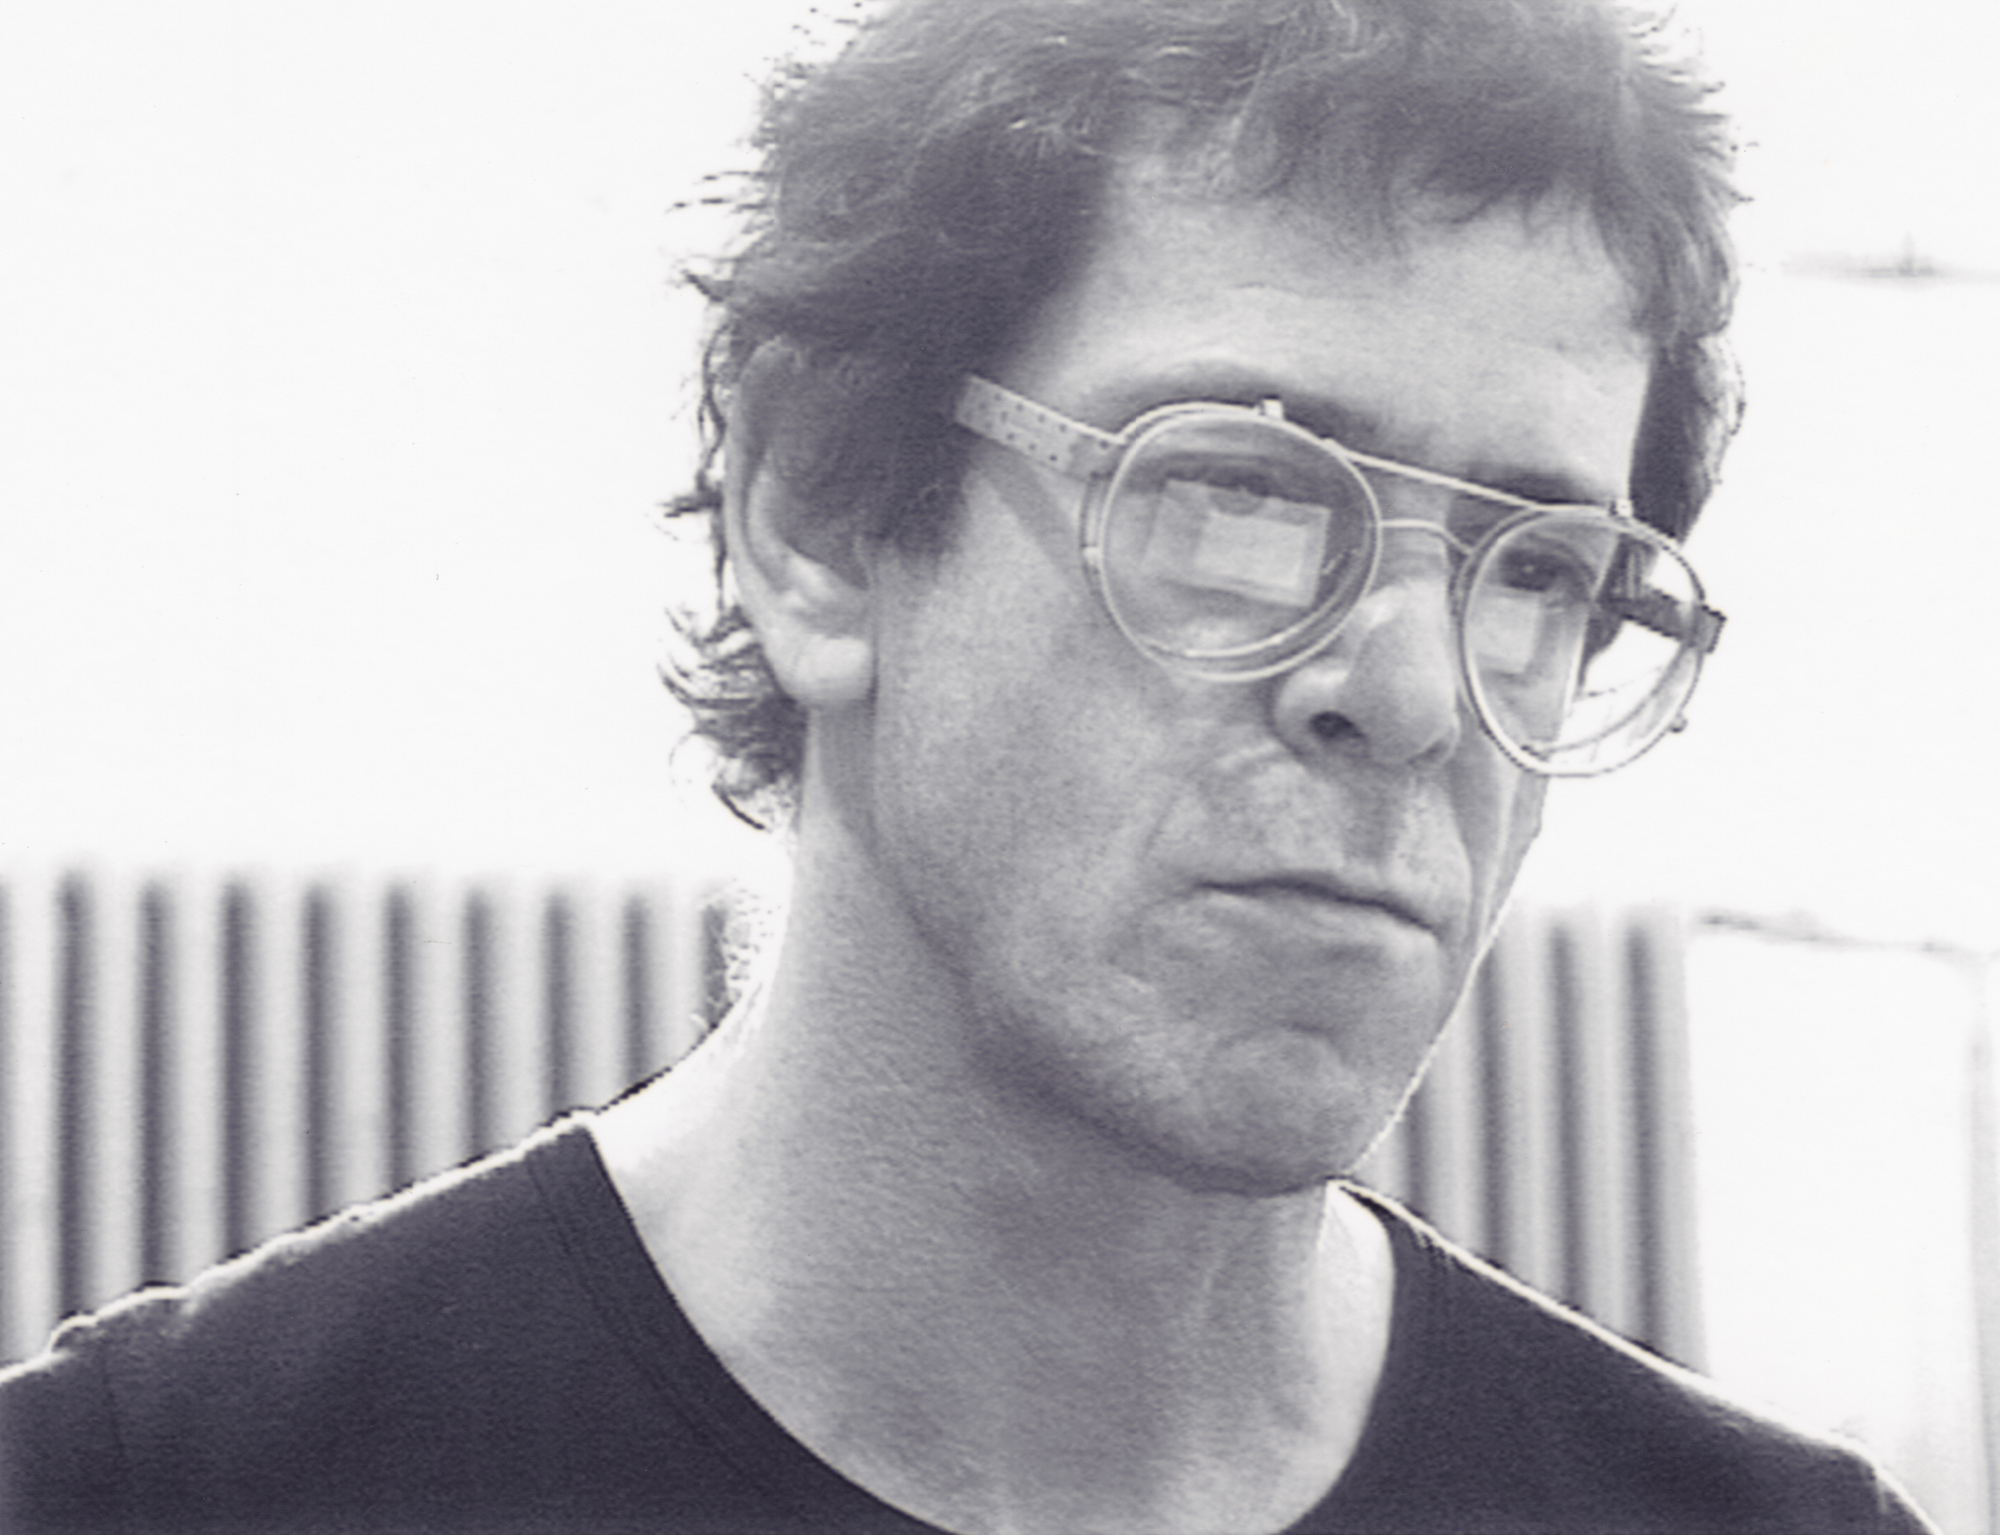 Lou Reed by Thomas Wollenberger